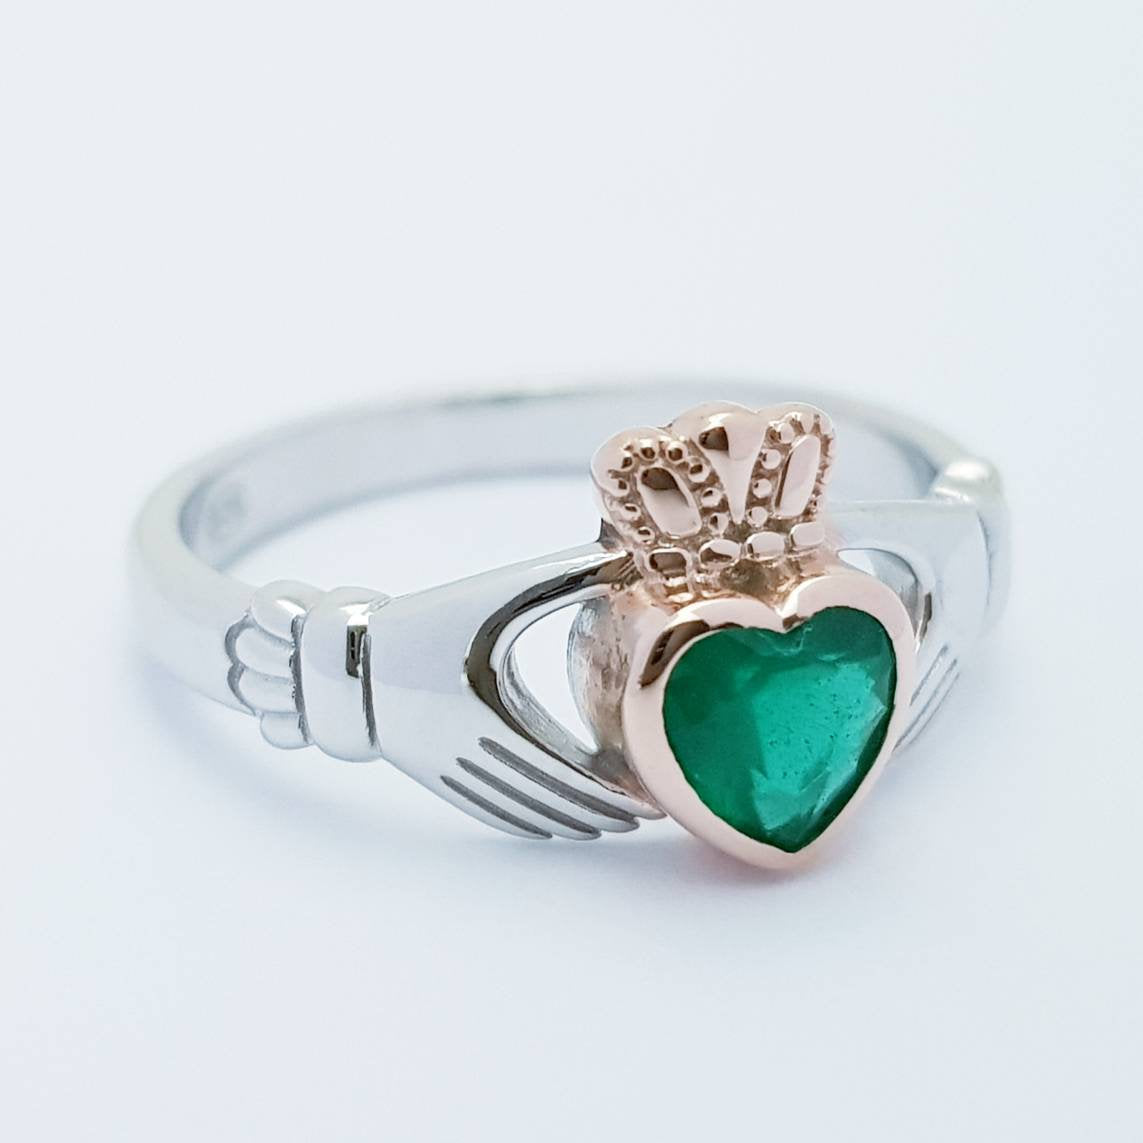 Sterling Silver Rose Gold plated Claddagh ring set with emerald green stone, irish claddagh rings